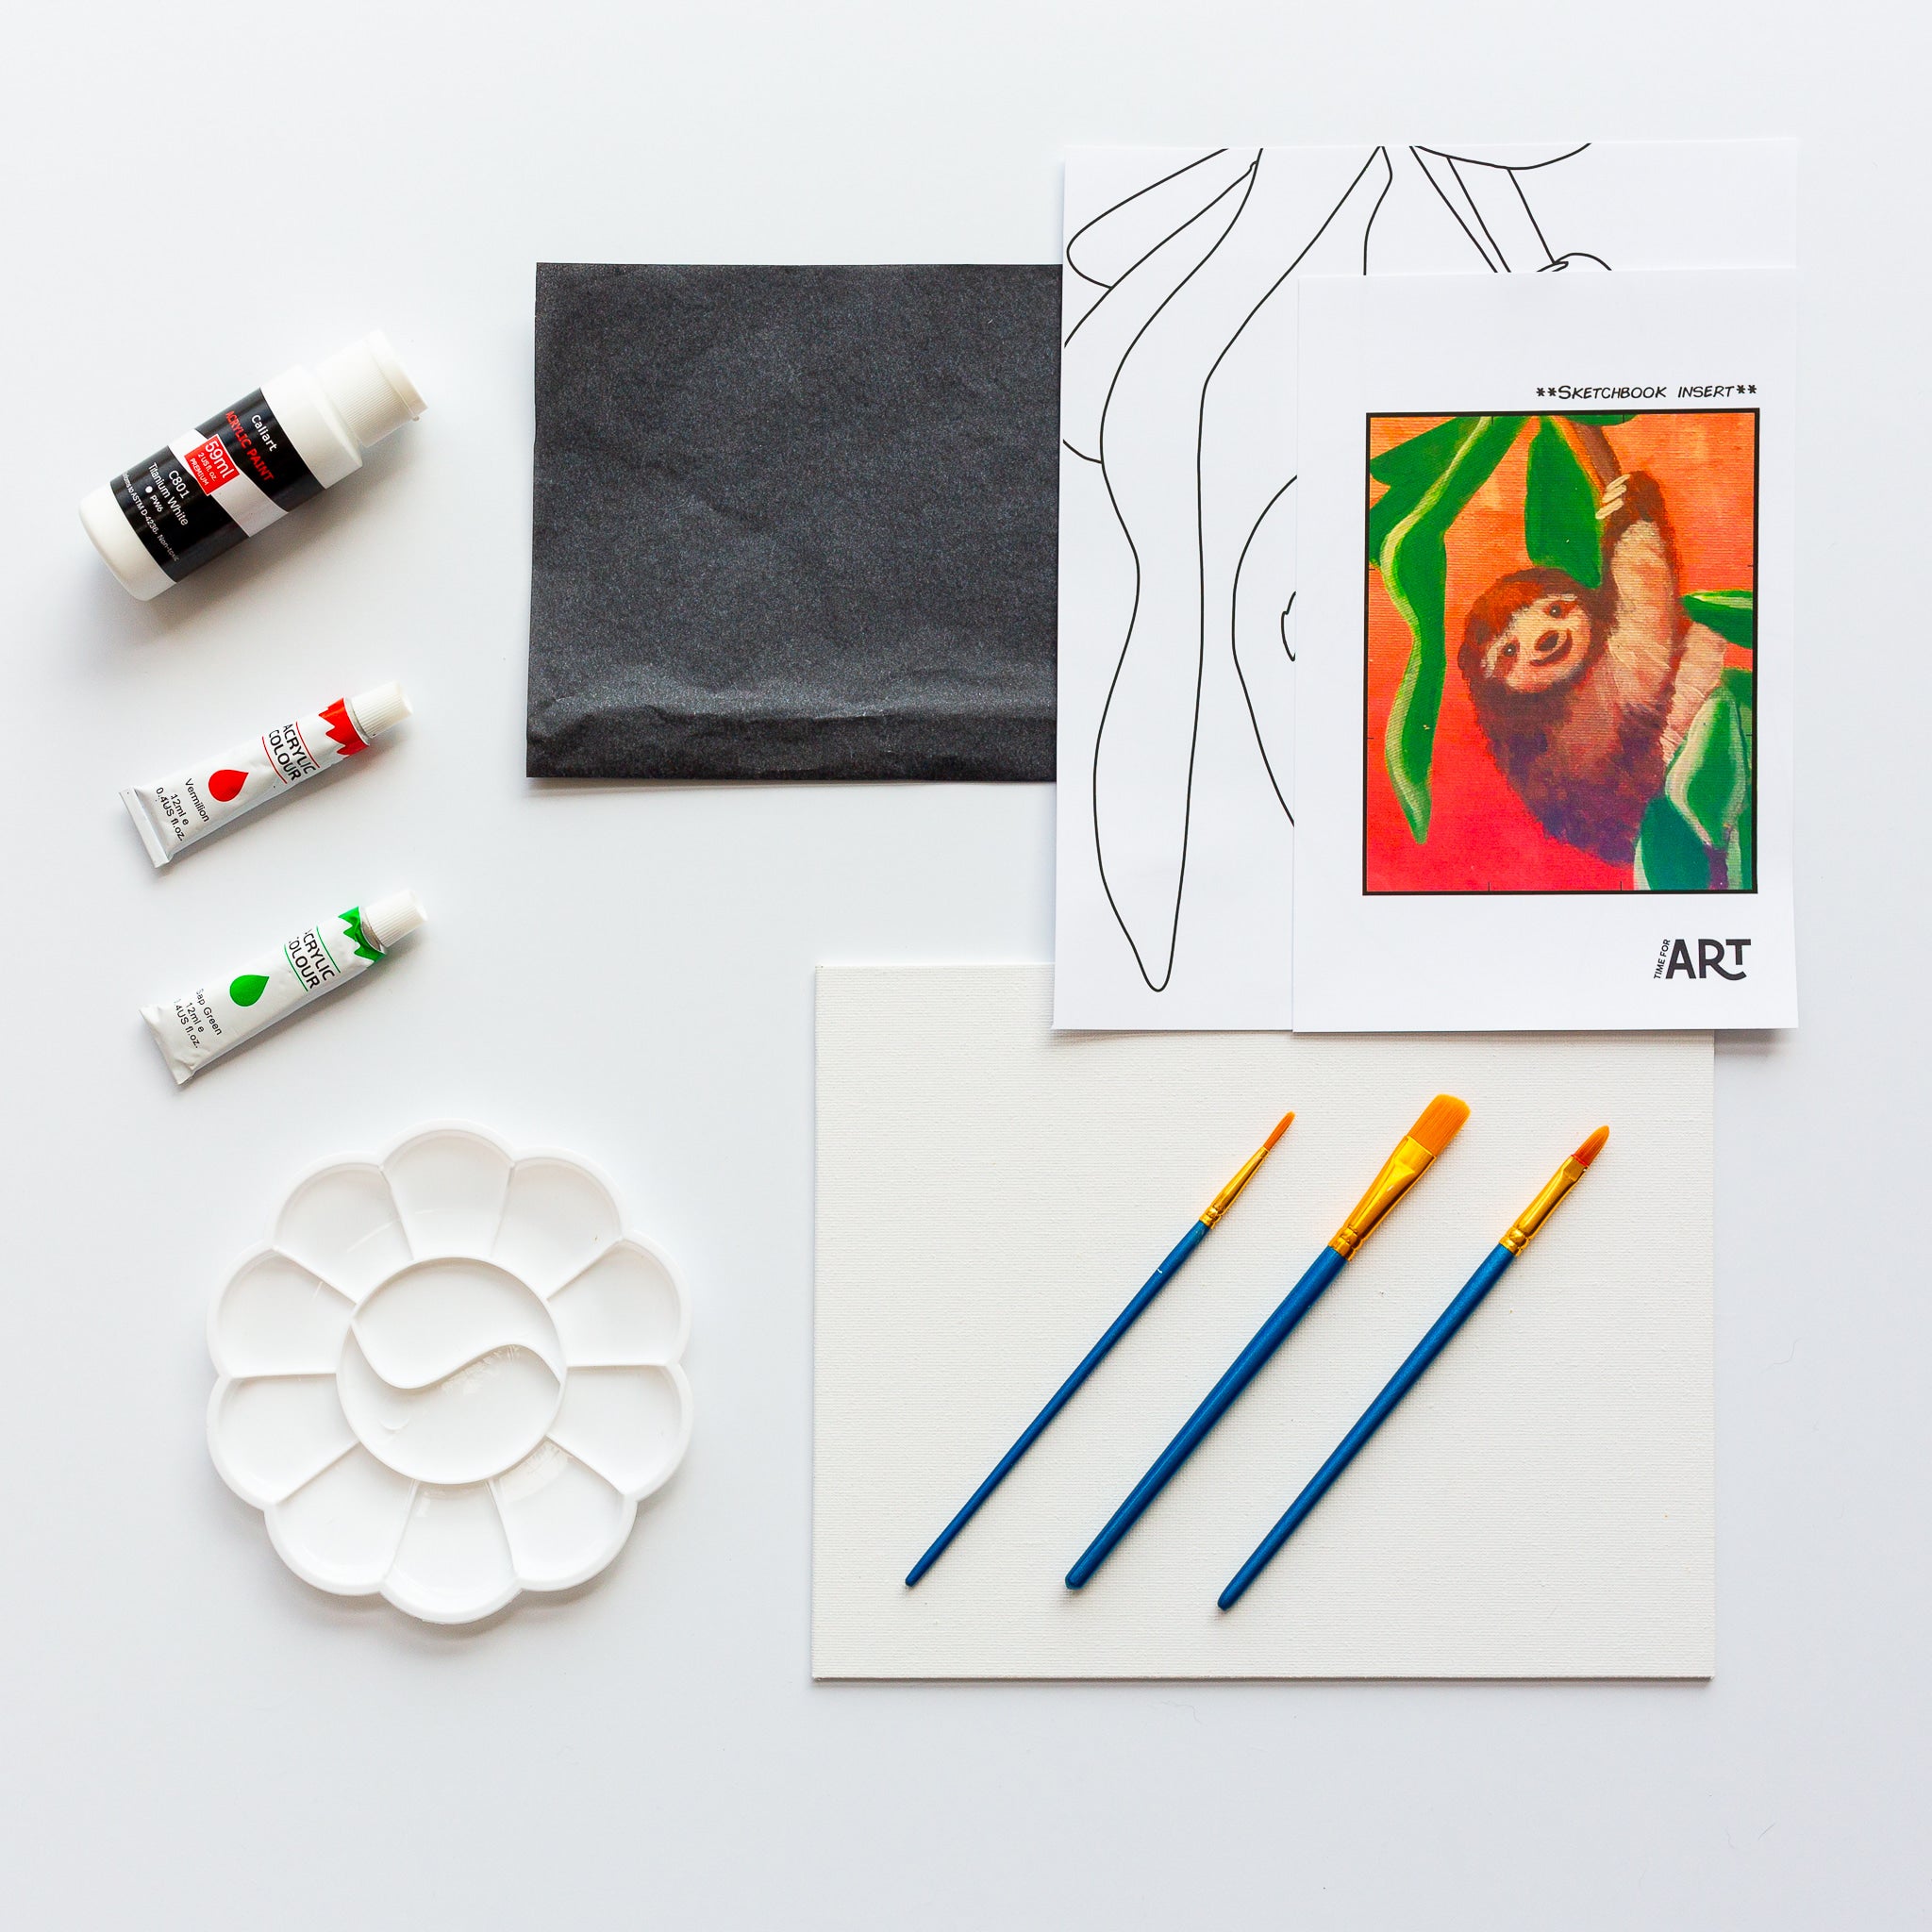 Whats included in the baby sloth painting kit. 3 acrylic paints, painters pallet, brushes, canvas panel, traceable outline, and reference image.